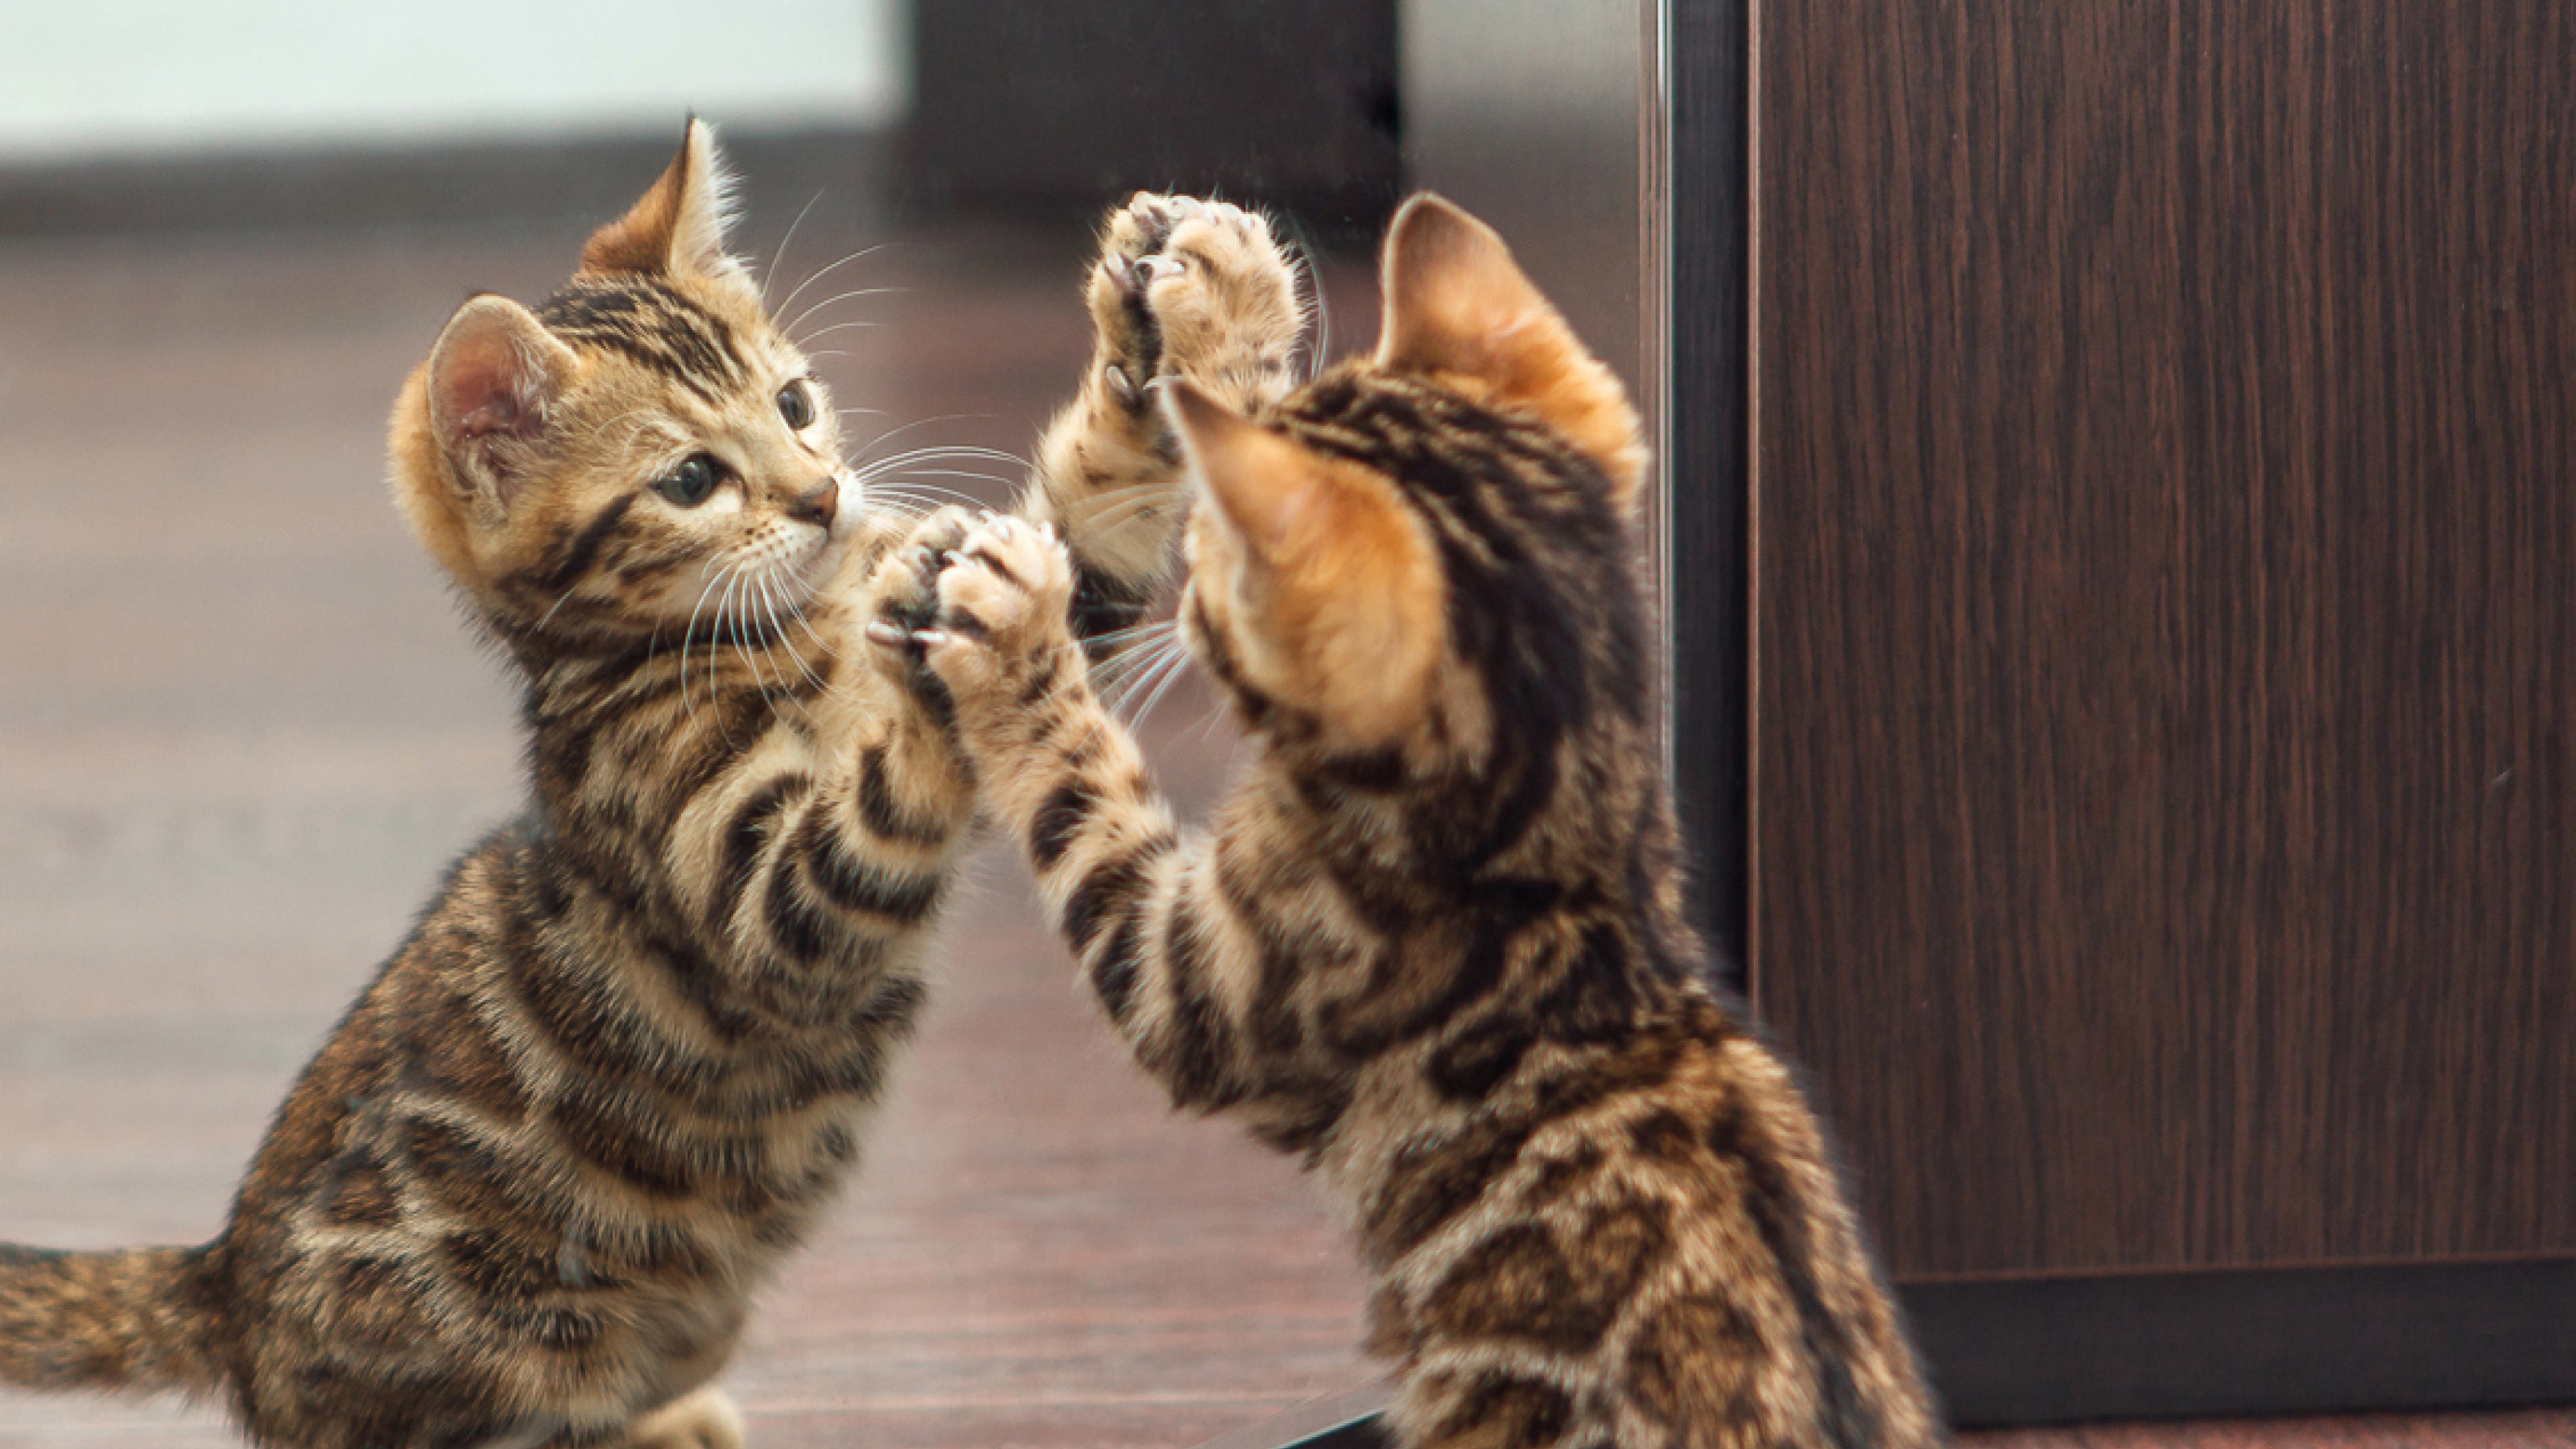 A speckled kitten swats at itself in the mirror